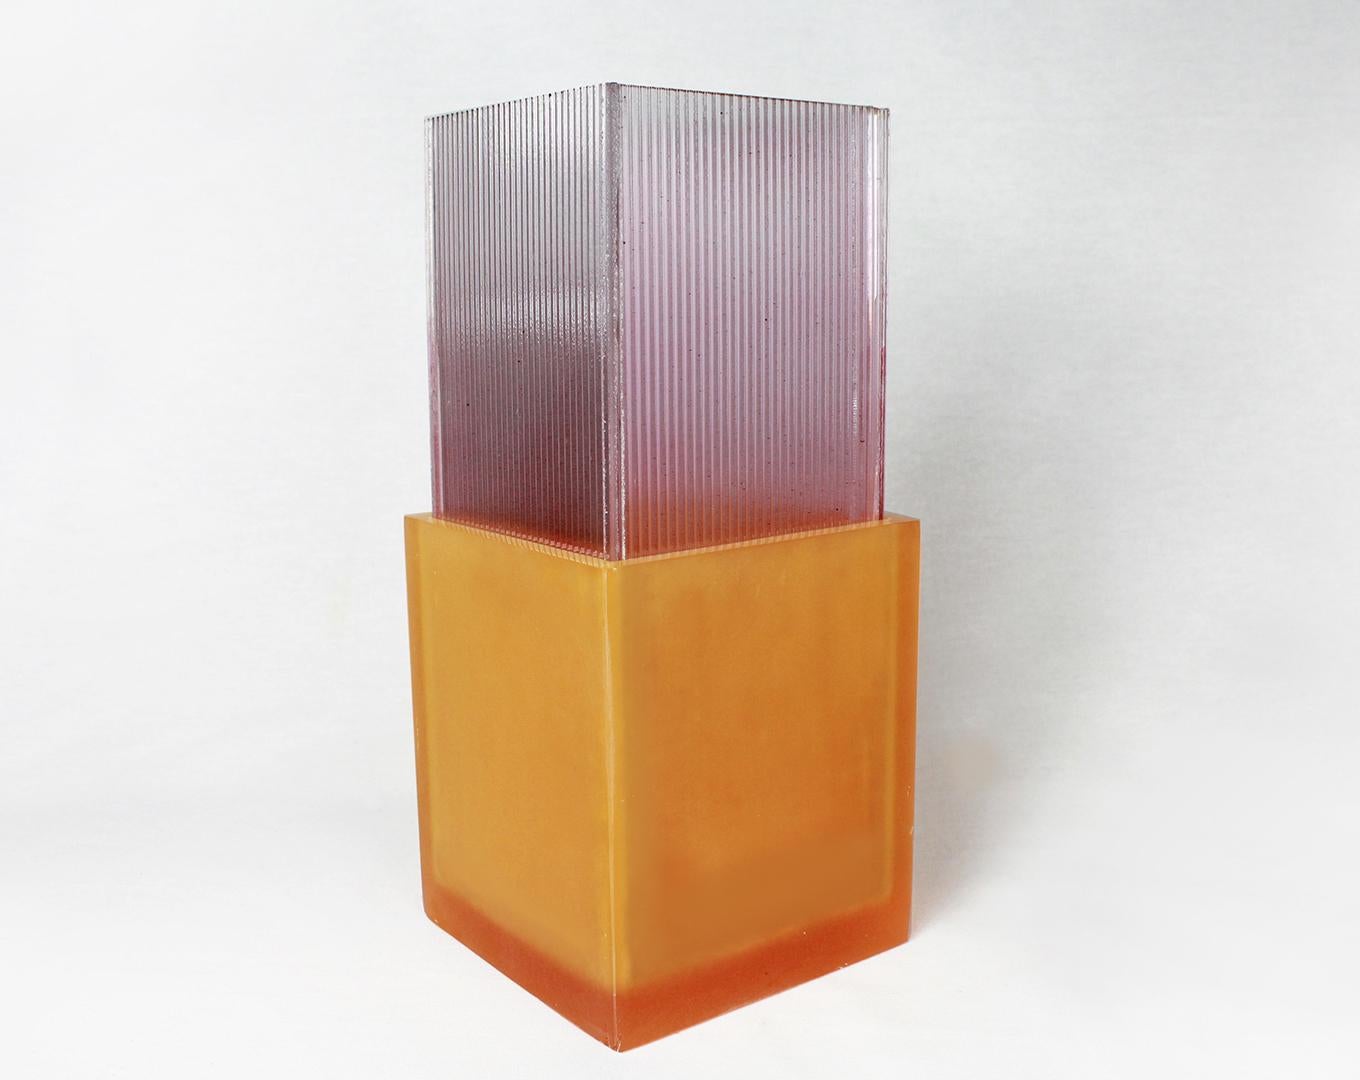 Contemporary Design Vase in Resin Glass Handcrafted Orange and Pink Color For Sale 2